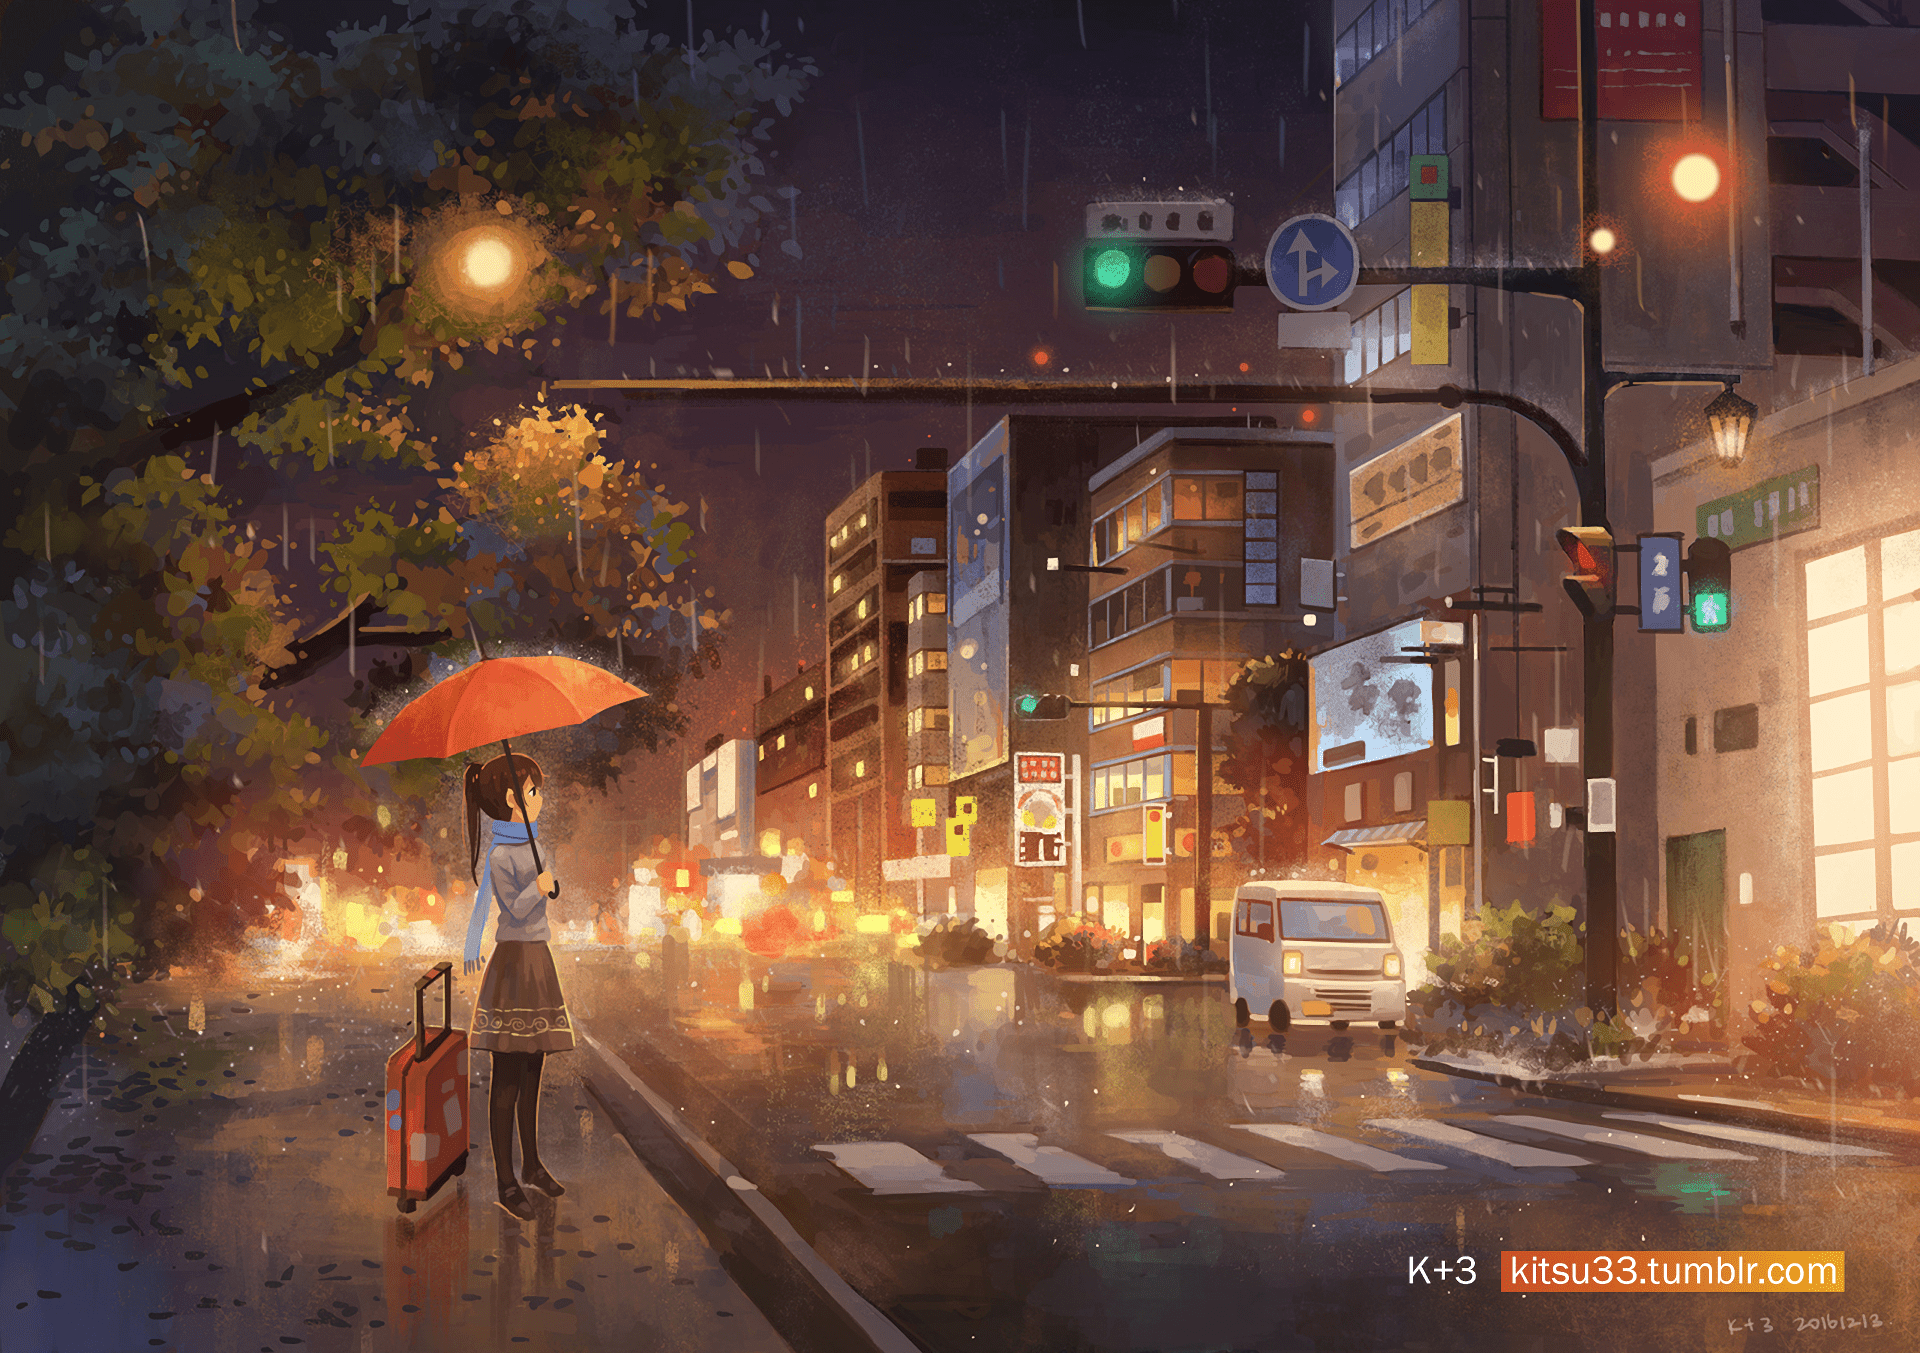 A digital painting of a woman with an umbrella standing on a street corner - Anime city